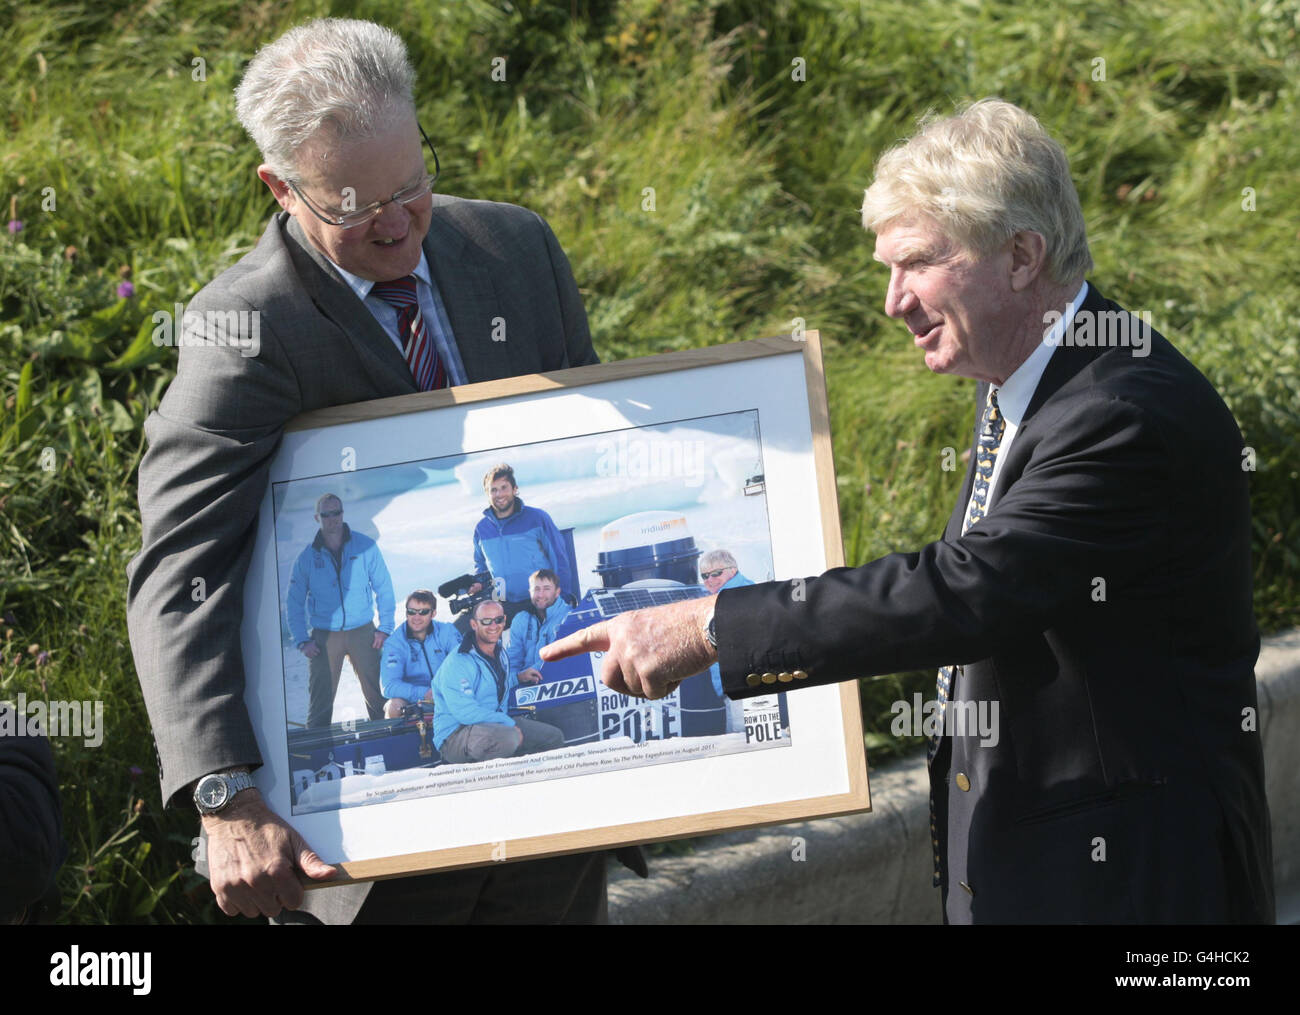 Scottish Environment minister Stewart Stevenson (left) meets explorer Jock Wishart to congratulate him on his and his crews success in reaching the North Pole in a rowing boat, outside the Scottish parliament Edinburgh. Stock Photo